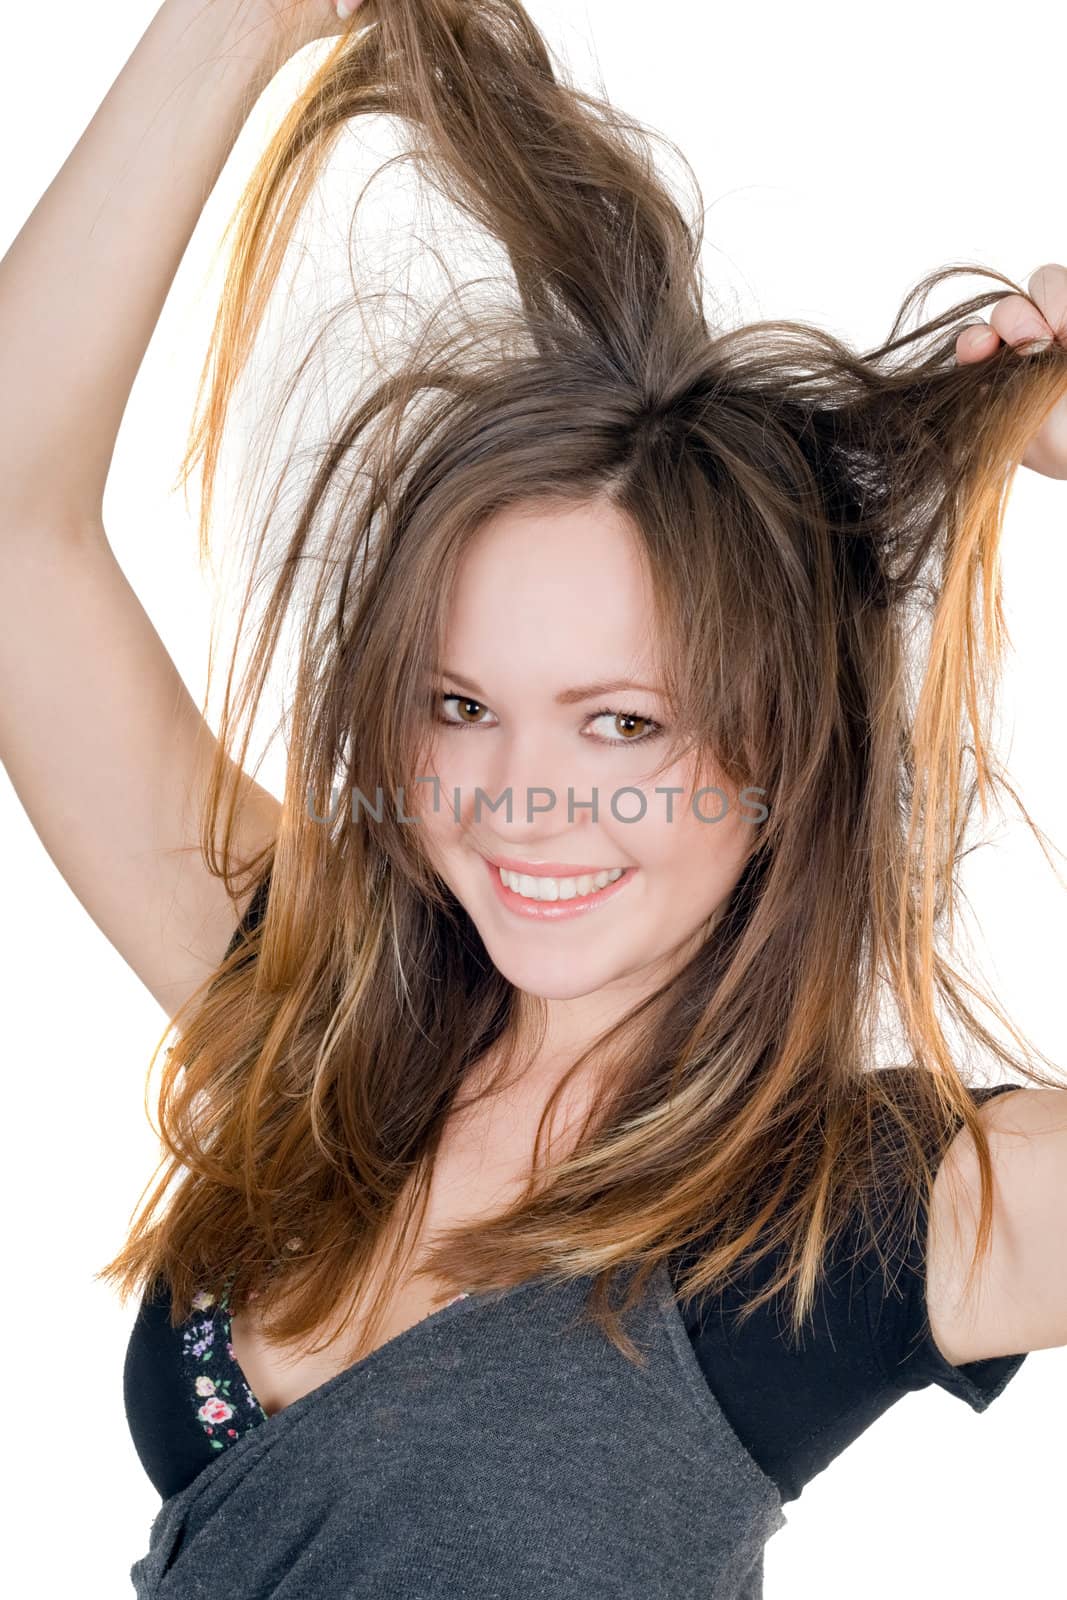 Portrait of the smiling playful girl. Isolated